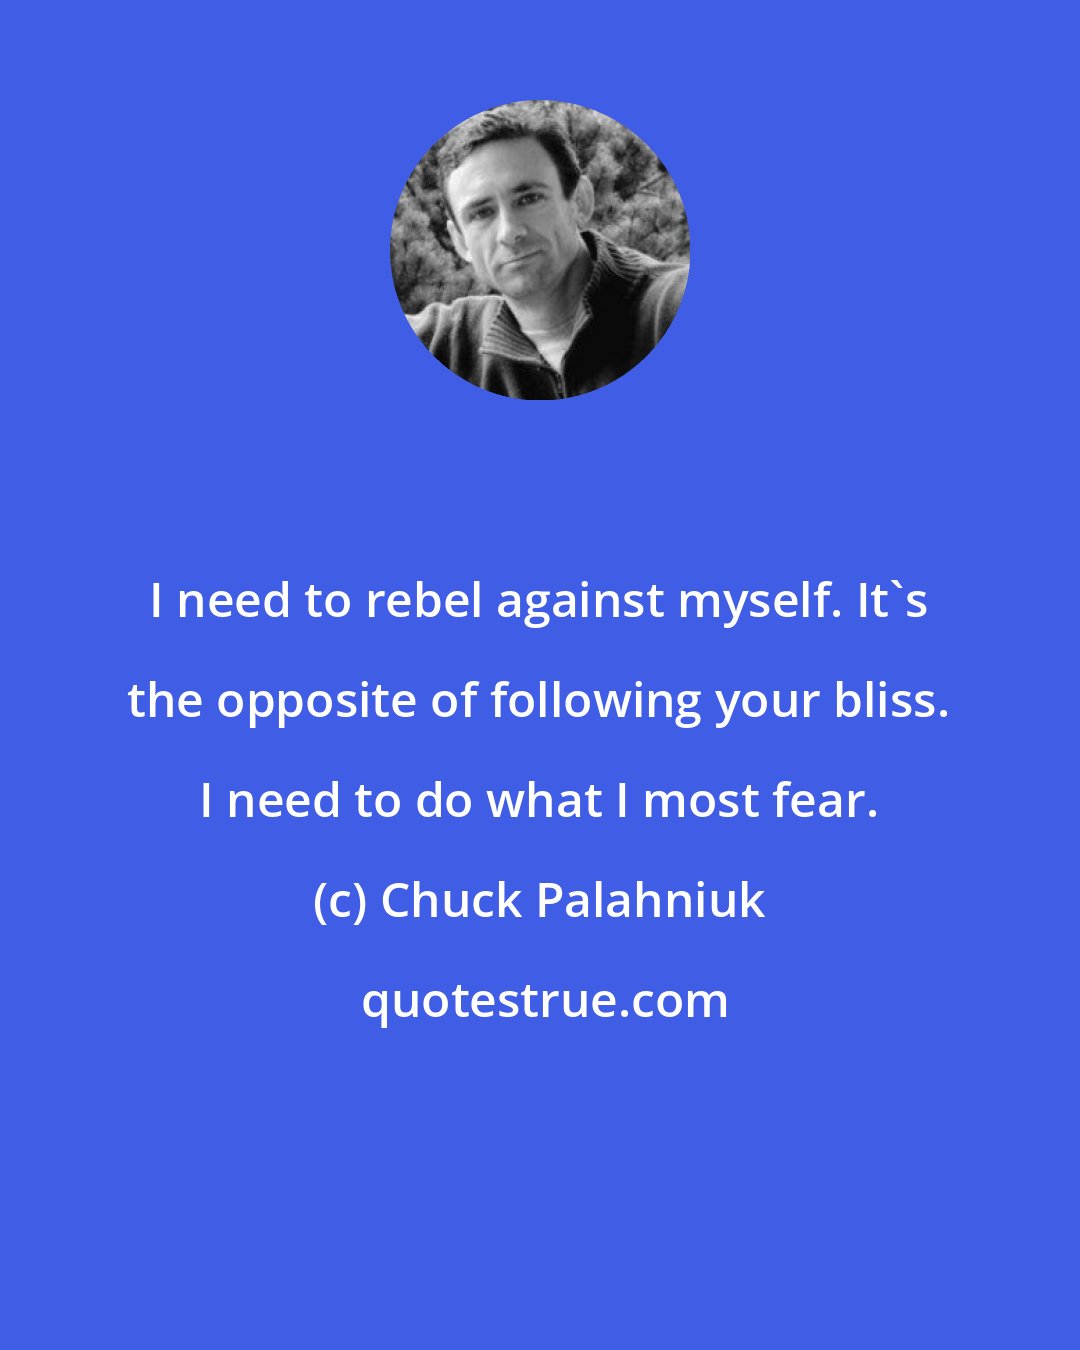 Chuck Palahniuk: I need to rebel against myself. It's the opposite of following your bliss. I need to do what I most fear.